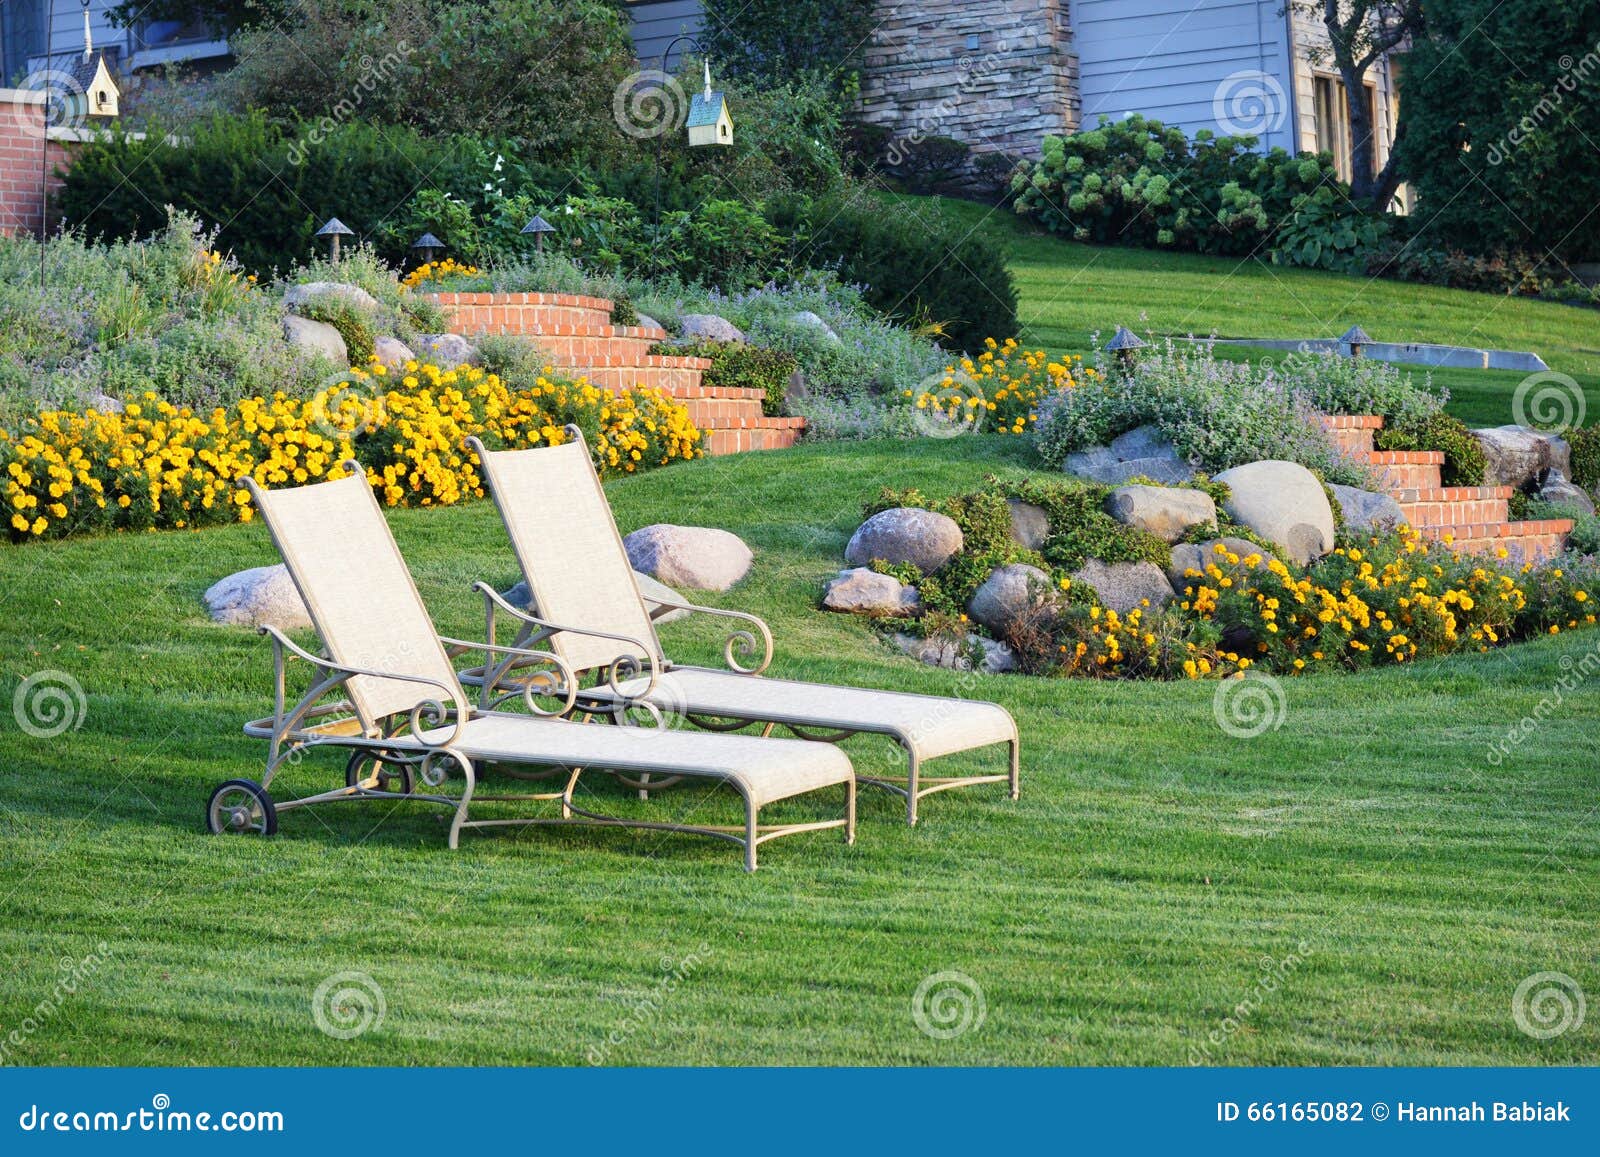 white lawn chairs landscaped yard